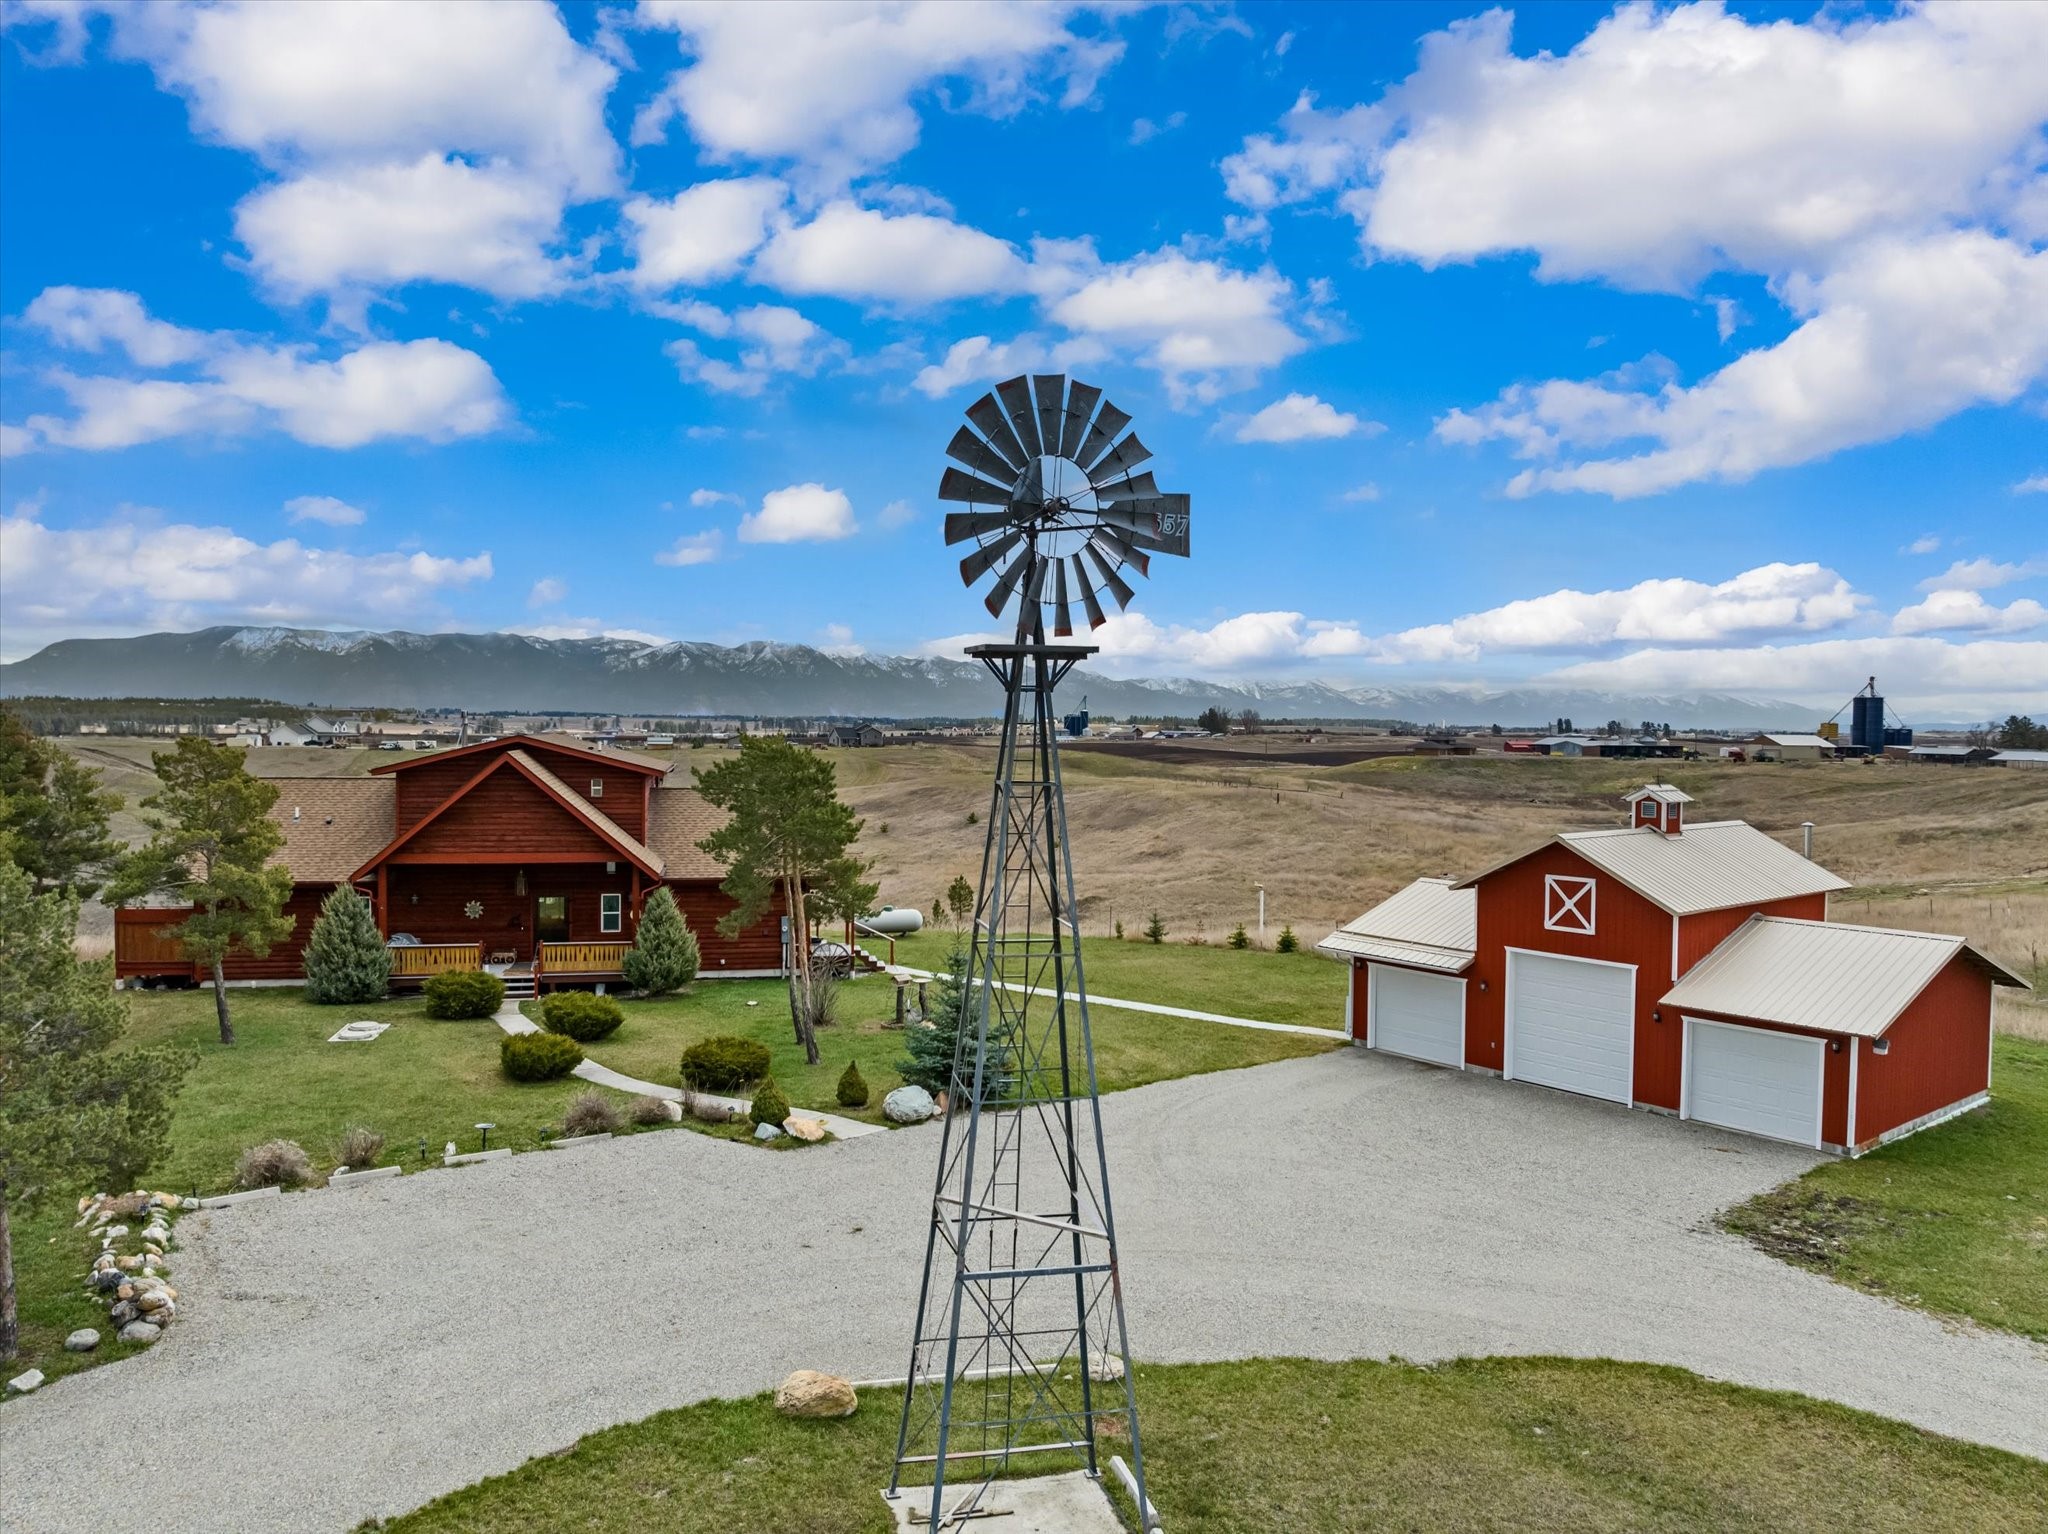 PRICE IMPROVEMENT! There’s nothing like driving down a country road, being greeted by a nostalgic windmill and a classic red barn as you approach your new home. Welcome to 657 Lone Coyote Trail in Kalispell, Montana.  Nestled on a sprawling 7.7-acres with unparalleled views of Whitefish Mountain Resort, Glacier National Park, and the majestic Rocky Mountain Range. Featuring a 3 stall garage and large shed with a lean-to that provide ample space for storage or the ability to create your own mini farm. This charming split-log home boasts 3025 square feet, 2 bedrooms and 4 bathroom, an inviting open-concept living space is complete with tongue and groove ceilings, floor to ceiling east facing windows and a fireplace that creates a warm atmosphere perfect for gatherings and relaxation. Step into the spacious kitchen equipped with a full size double oven, inset lighting, granite countertops, hickory cabinetry with soft-close features and a large pantry. The main level primary bedroom boasts an en suite with tile surround and dual sinks; a walk-in closet and access to a covered addition ideal for a serene spa or a personalized sanctuary. Ascend the stairs to discover a versatile bonus area overlooking the living room via an indoor balcony; a perfect place to admire the mountain vistas. A second bedroom and a full bathroom complete the upper level, providing ample space for guests or family members. The walk-out basement presents additional living space, ideal for use as a bonus living area or entertainment zone, along with a 3/4 bathroom and ample storage opportunities. This property strikes a perfect balance between country living and convenience with easy access to amenities including Costco, Logan Health Hospital, and plenty of shopping opportunities just a few miles away. If you're ready to experience Montana living at its best don't hesitate to schedule an exclusive showing. Call Holly Naldrett 406-407-2355 or your real estate professional.